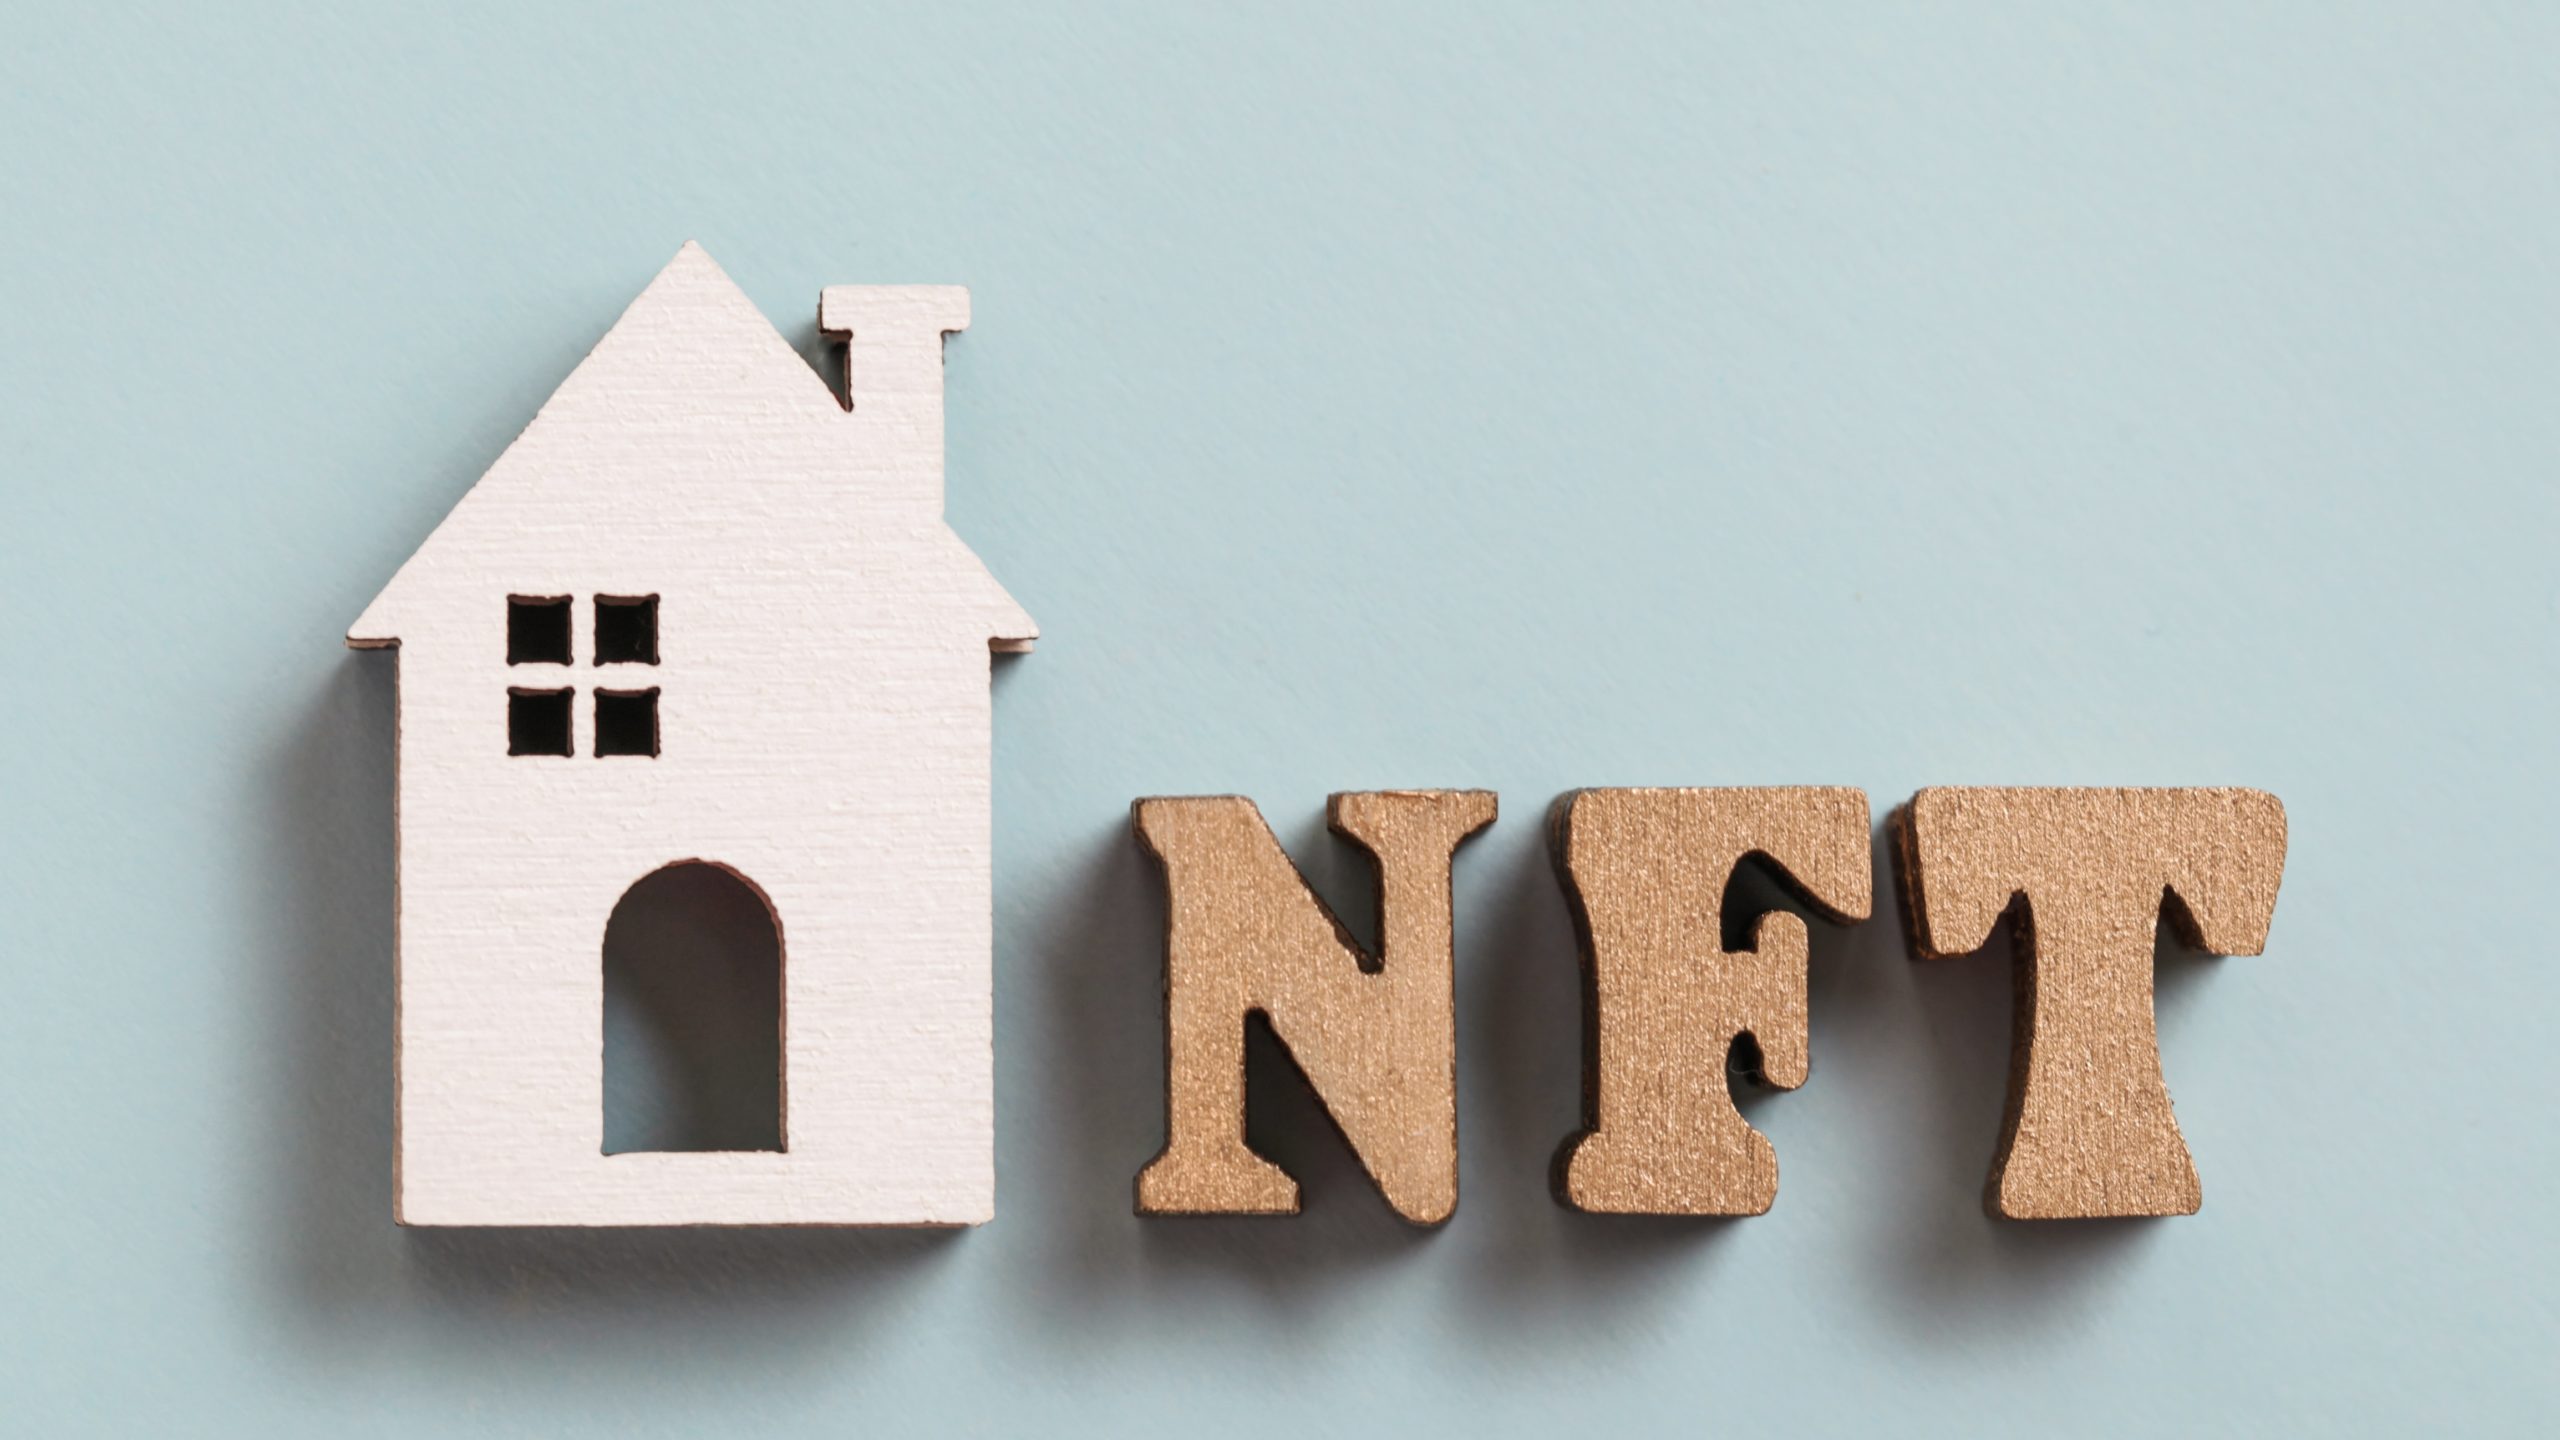 NFT News: House sells for US$175k on OpenSea; Ripple NFTs prepare to go live soon